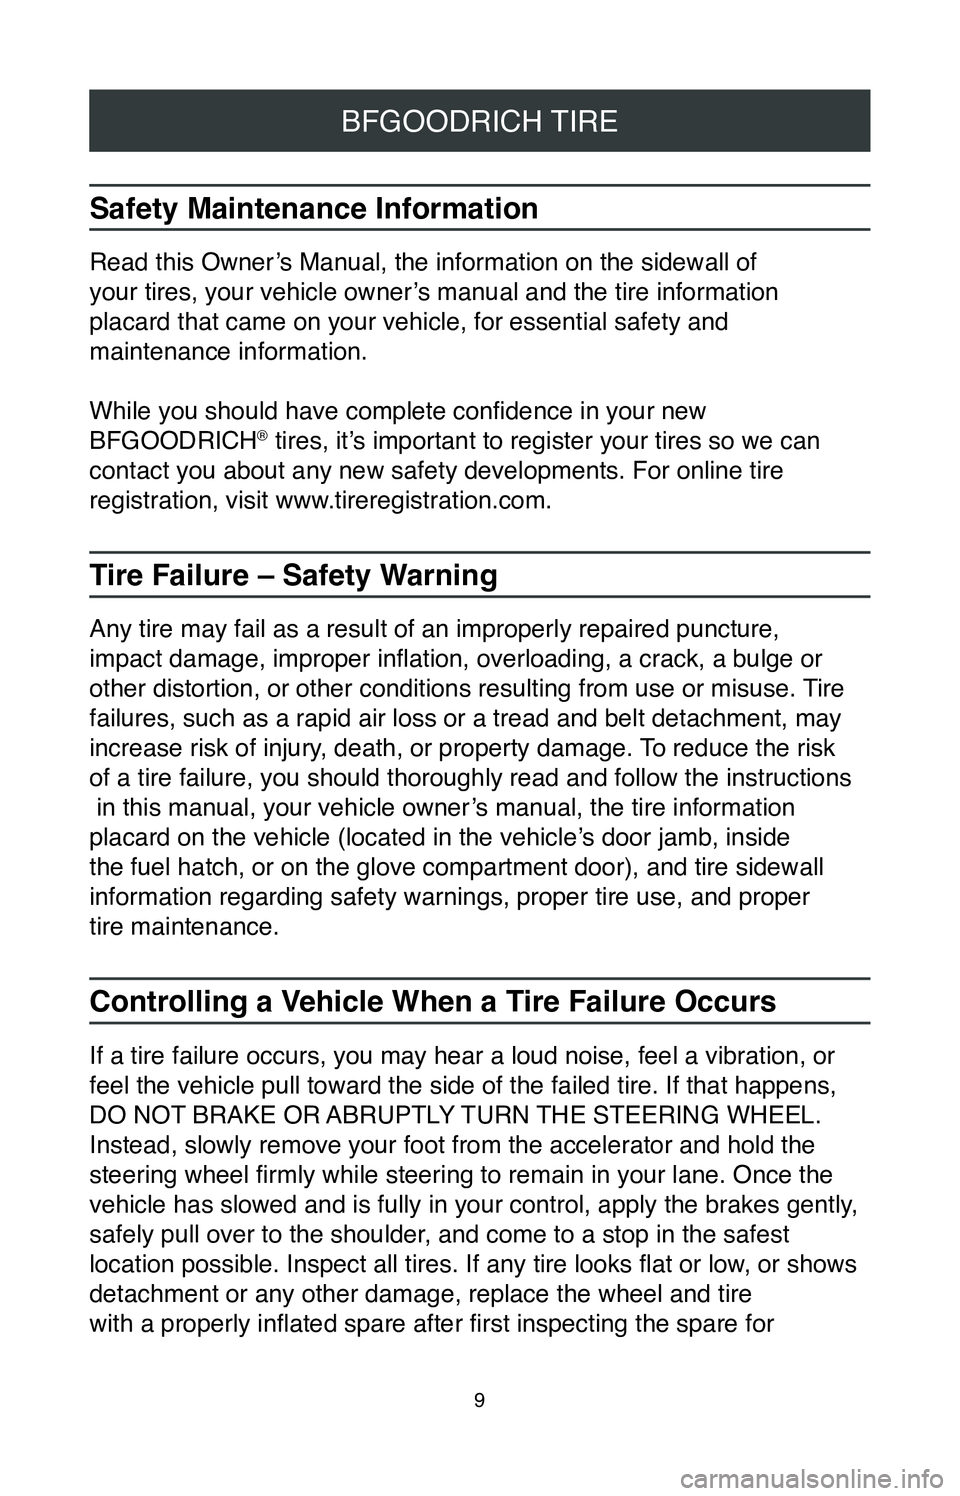 TOYOTA LAND CRUISER 2020  Warranties & Maintenance Guides (in English) 9
BFGOODRICH TIRE
Safety Maintenance Information
Read this Owner’s Manual, the information on the sidewall of  
your tires, your vehicle owner’s manual and the tire information   
placard that cam